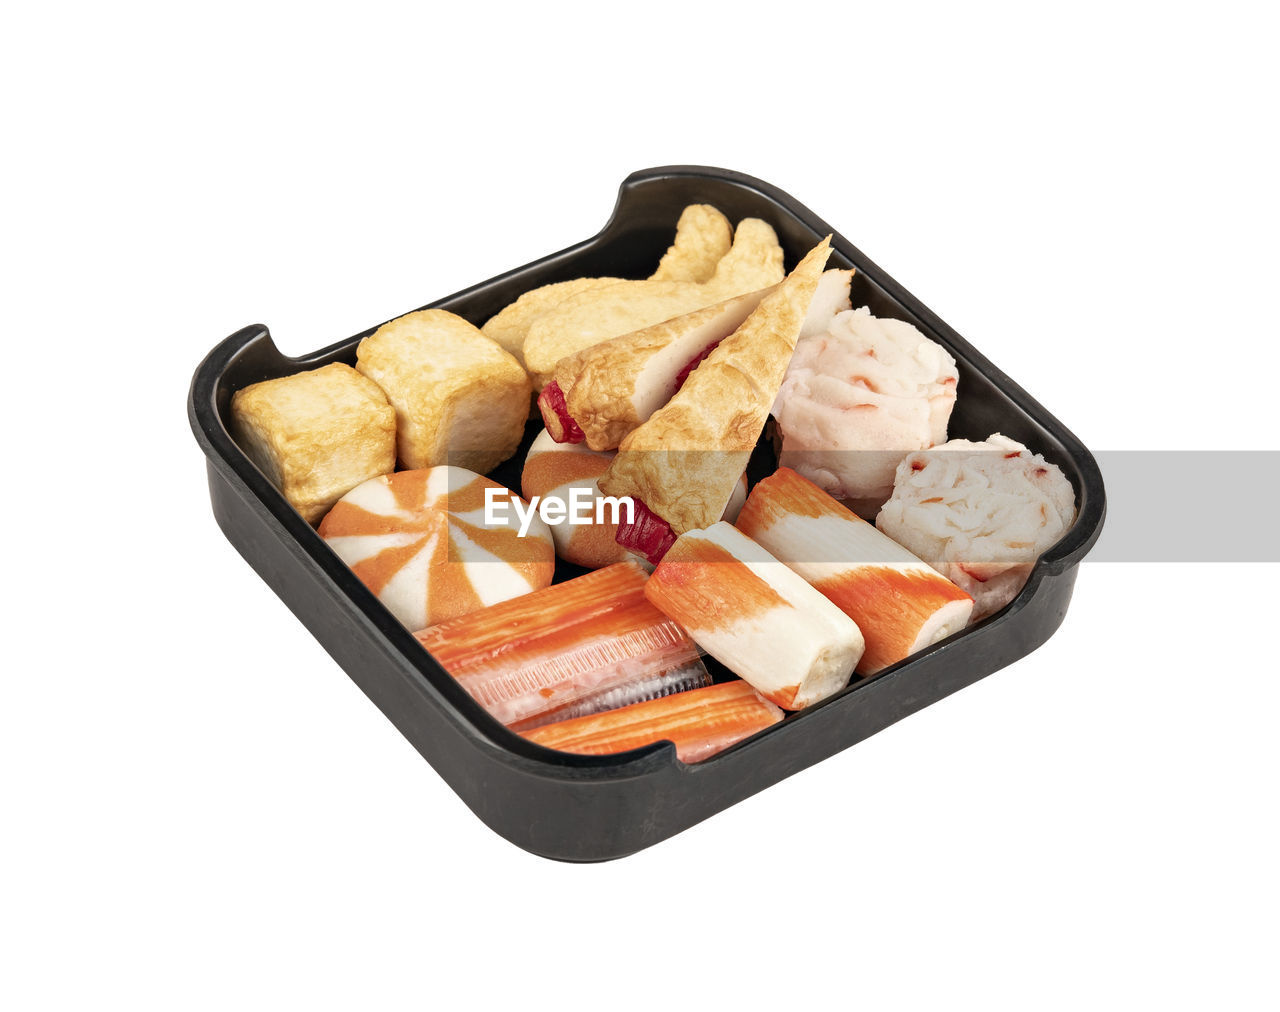 HIGH ANGLE VIEW OF FOOD IN CONTAINER